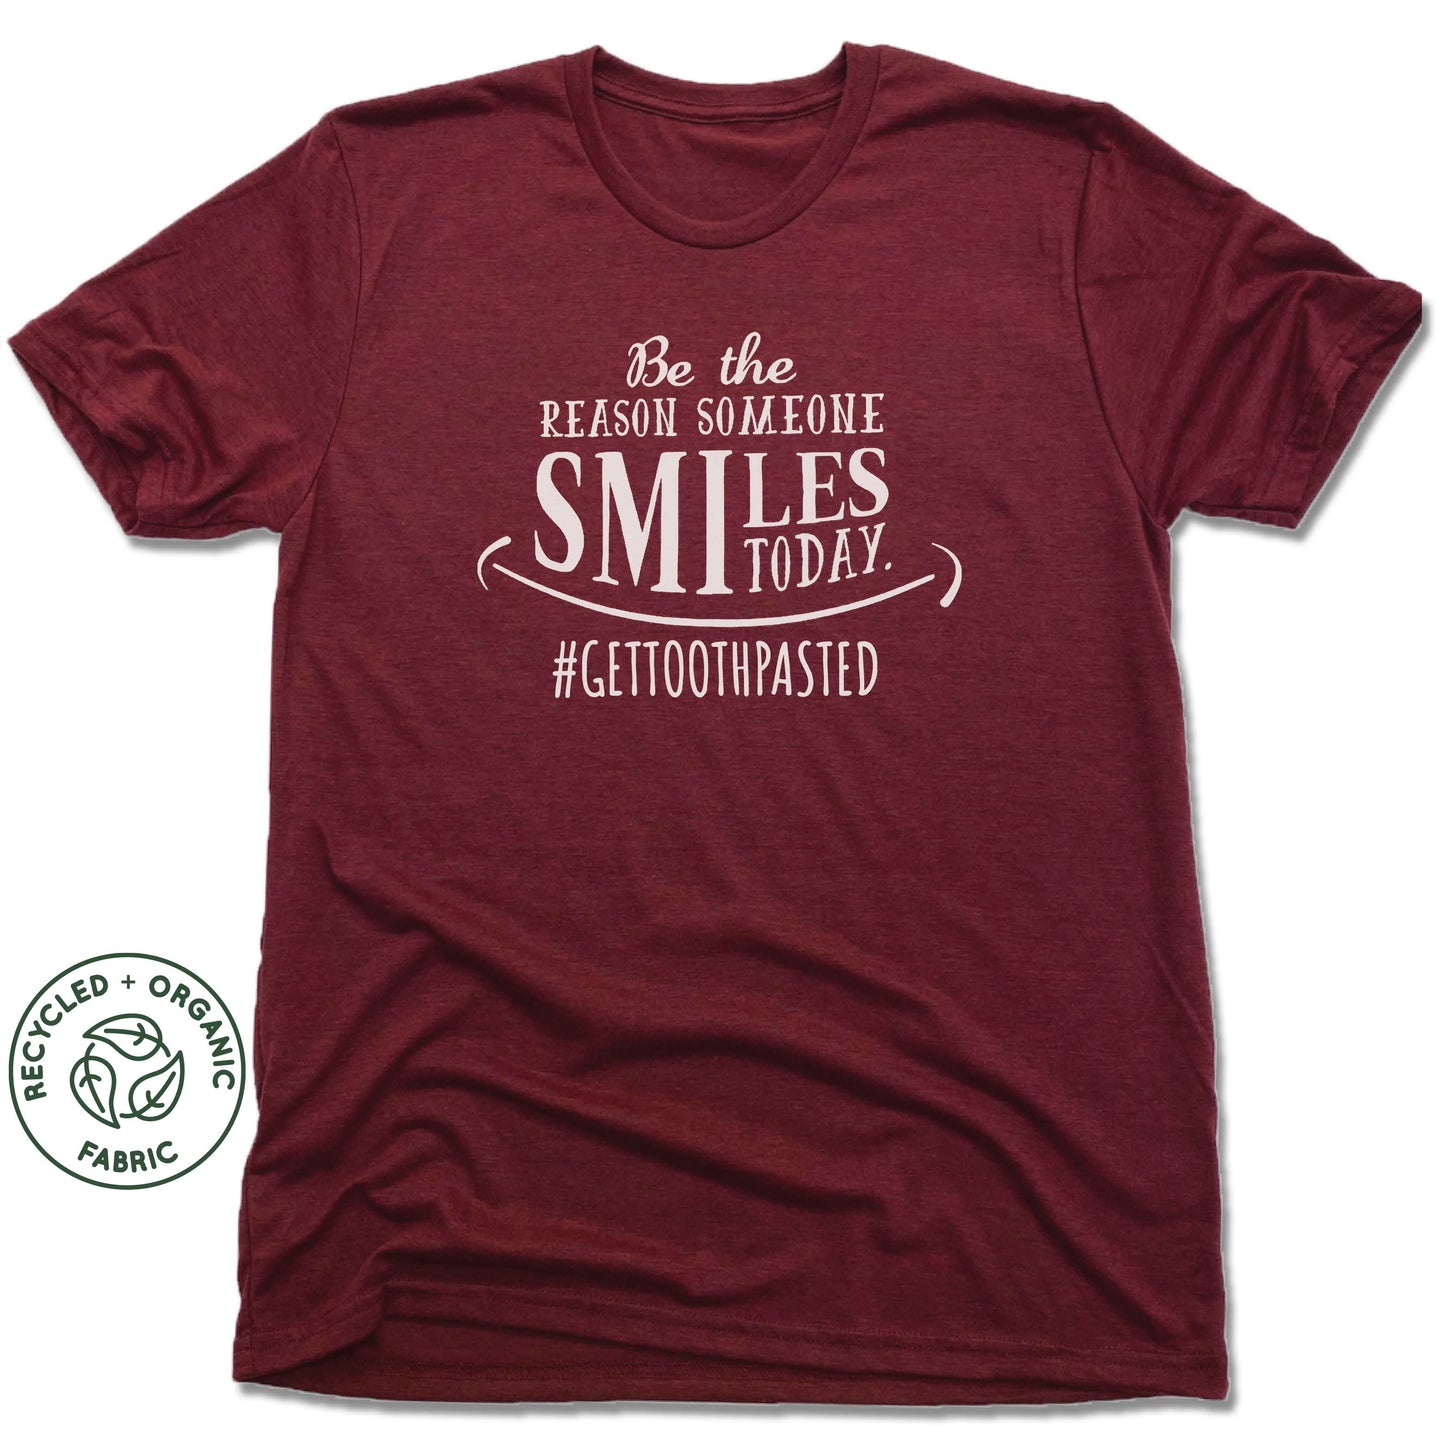 THE SISTER'S CLOSET | UNISEX VINO RED Recycled Tri-Blend